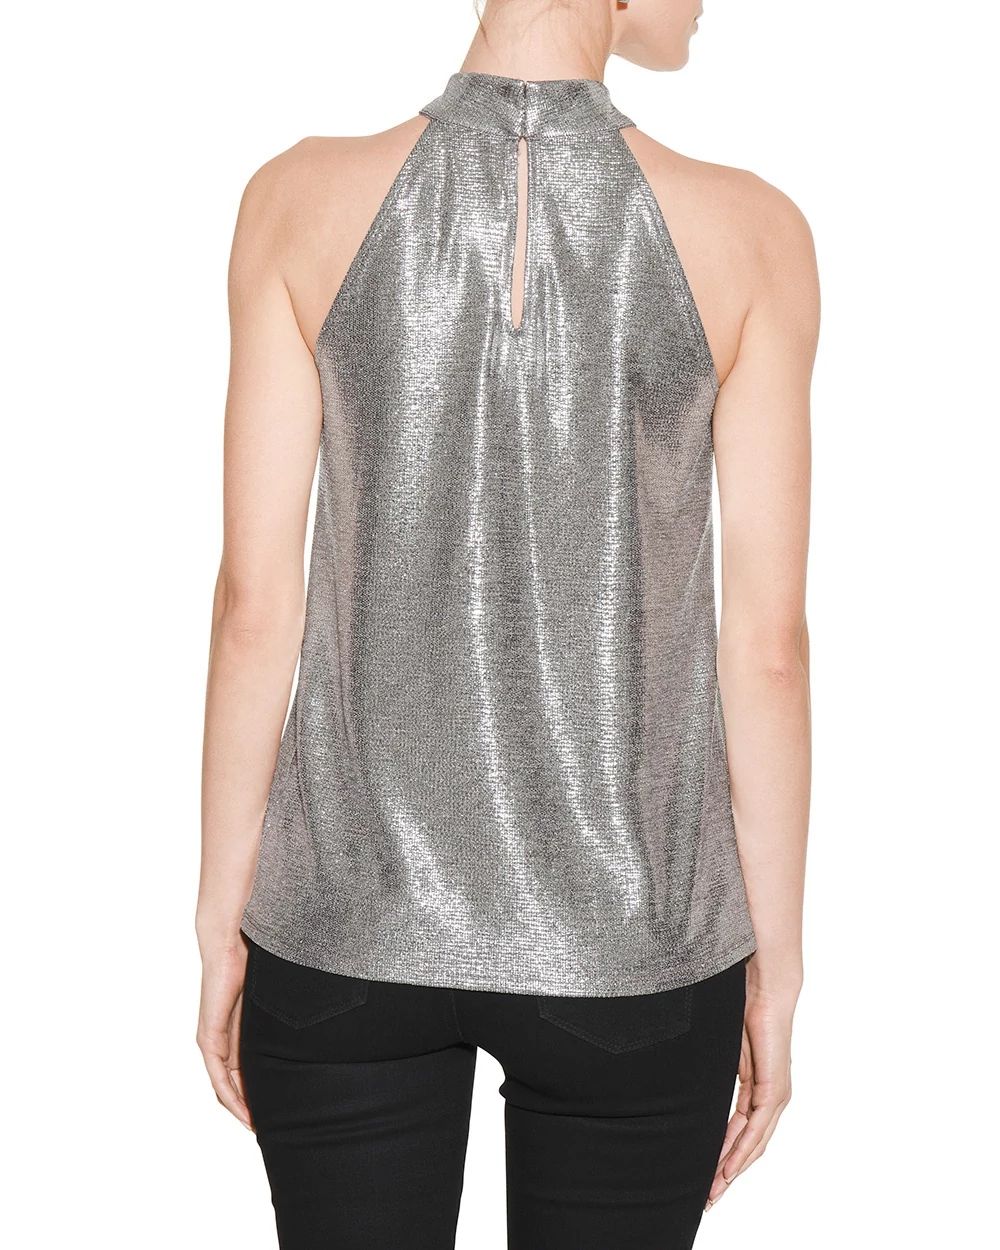 Outlet WHBM Dramatic Shine Halter Top click to view larger image.